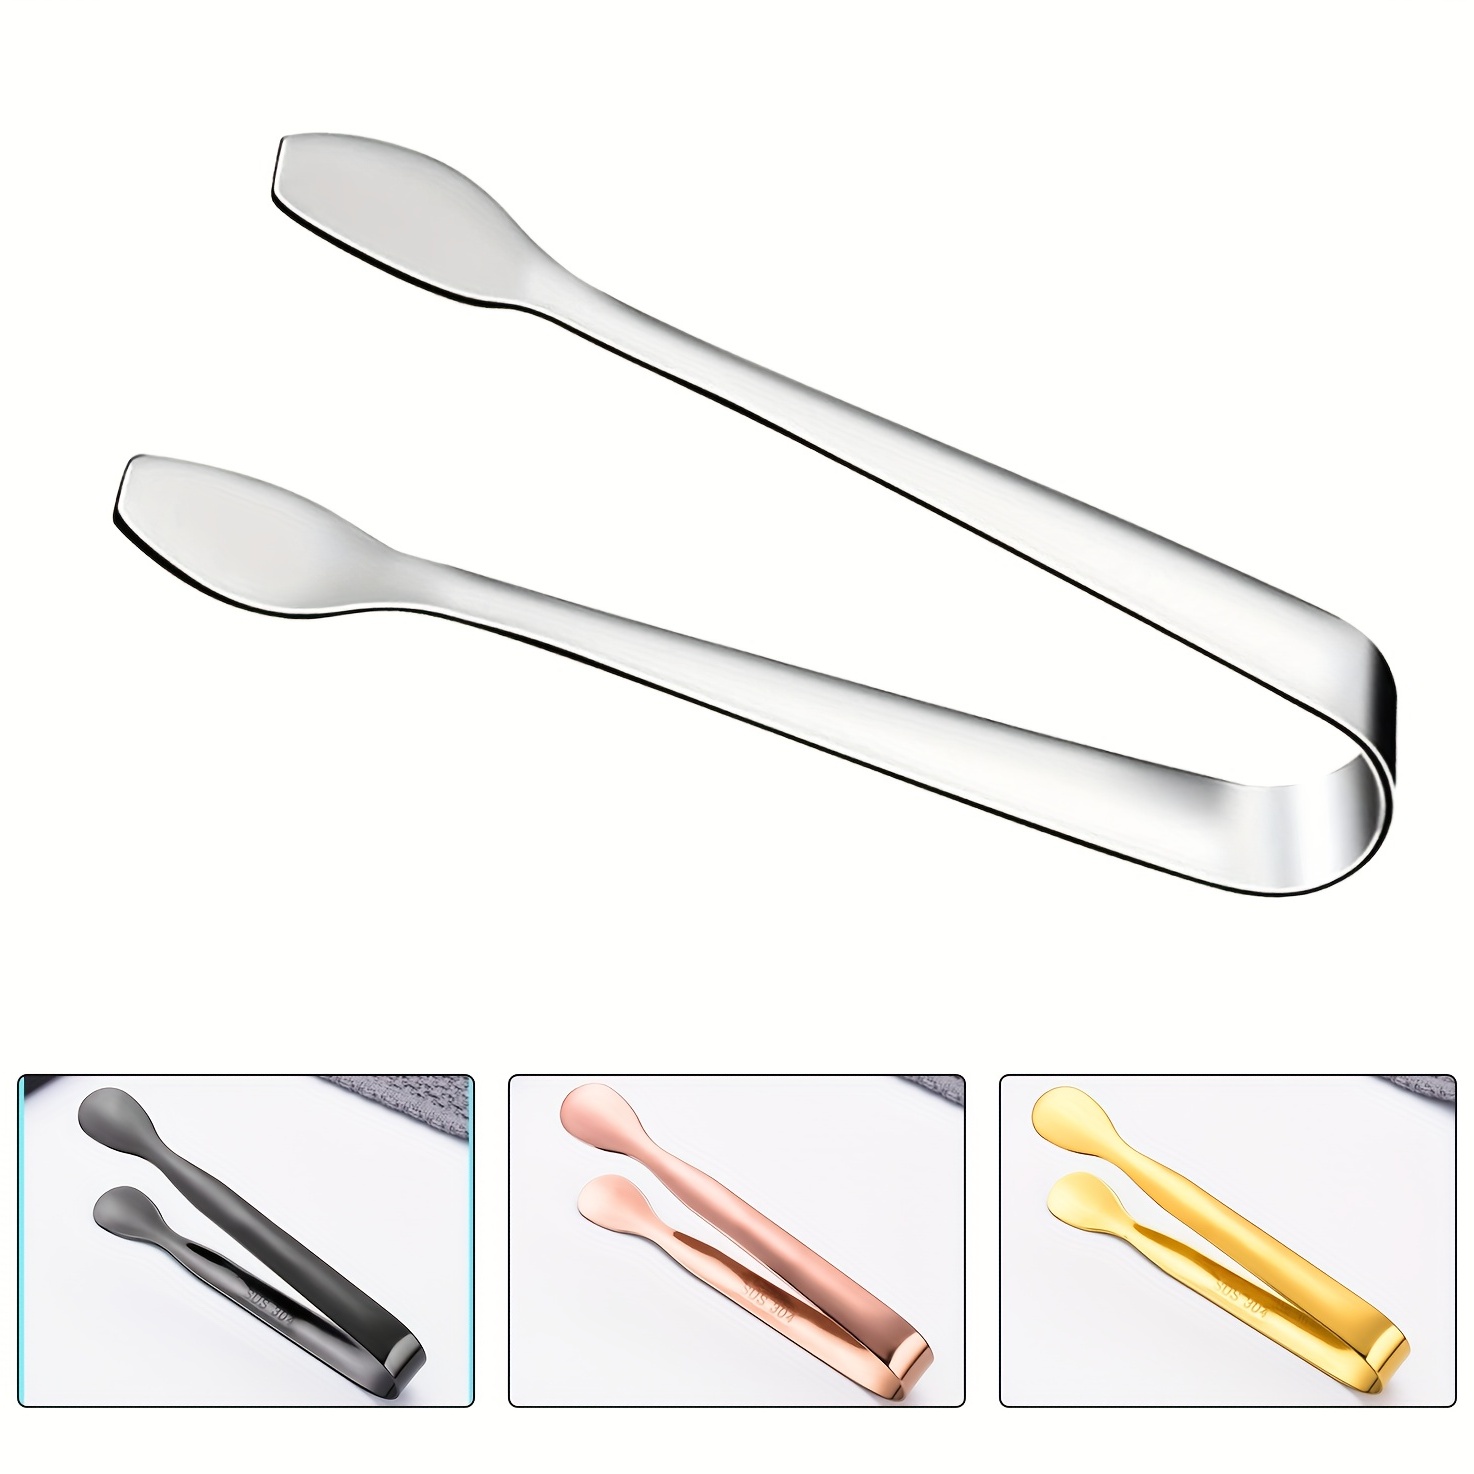 Mini Serving Tongs, Small Serving Utensils for Catering, Kitchen Tongs,  Food-Grade Premium 304 Stainless Steel Tongs, Heavy Duty 